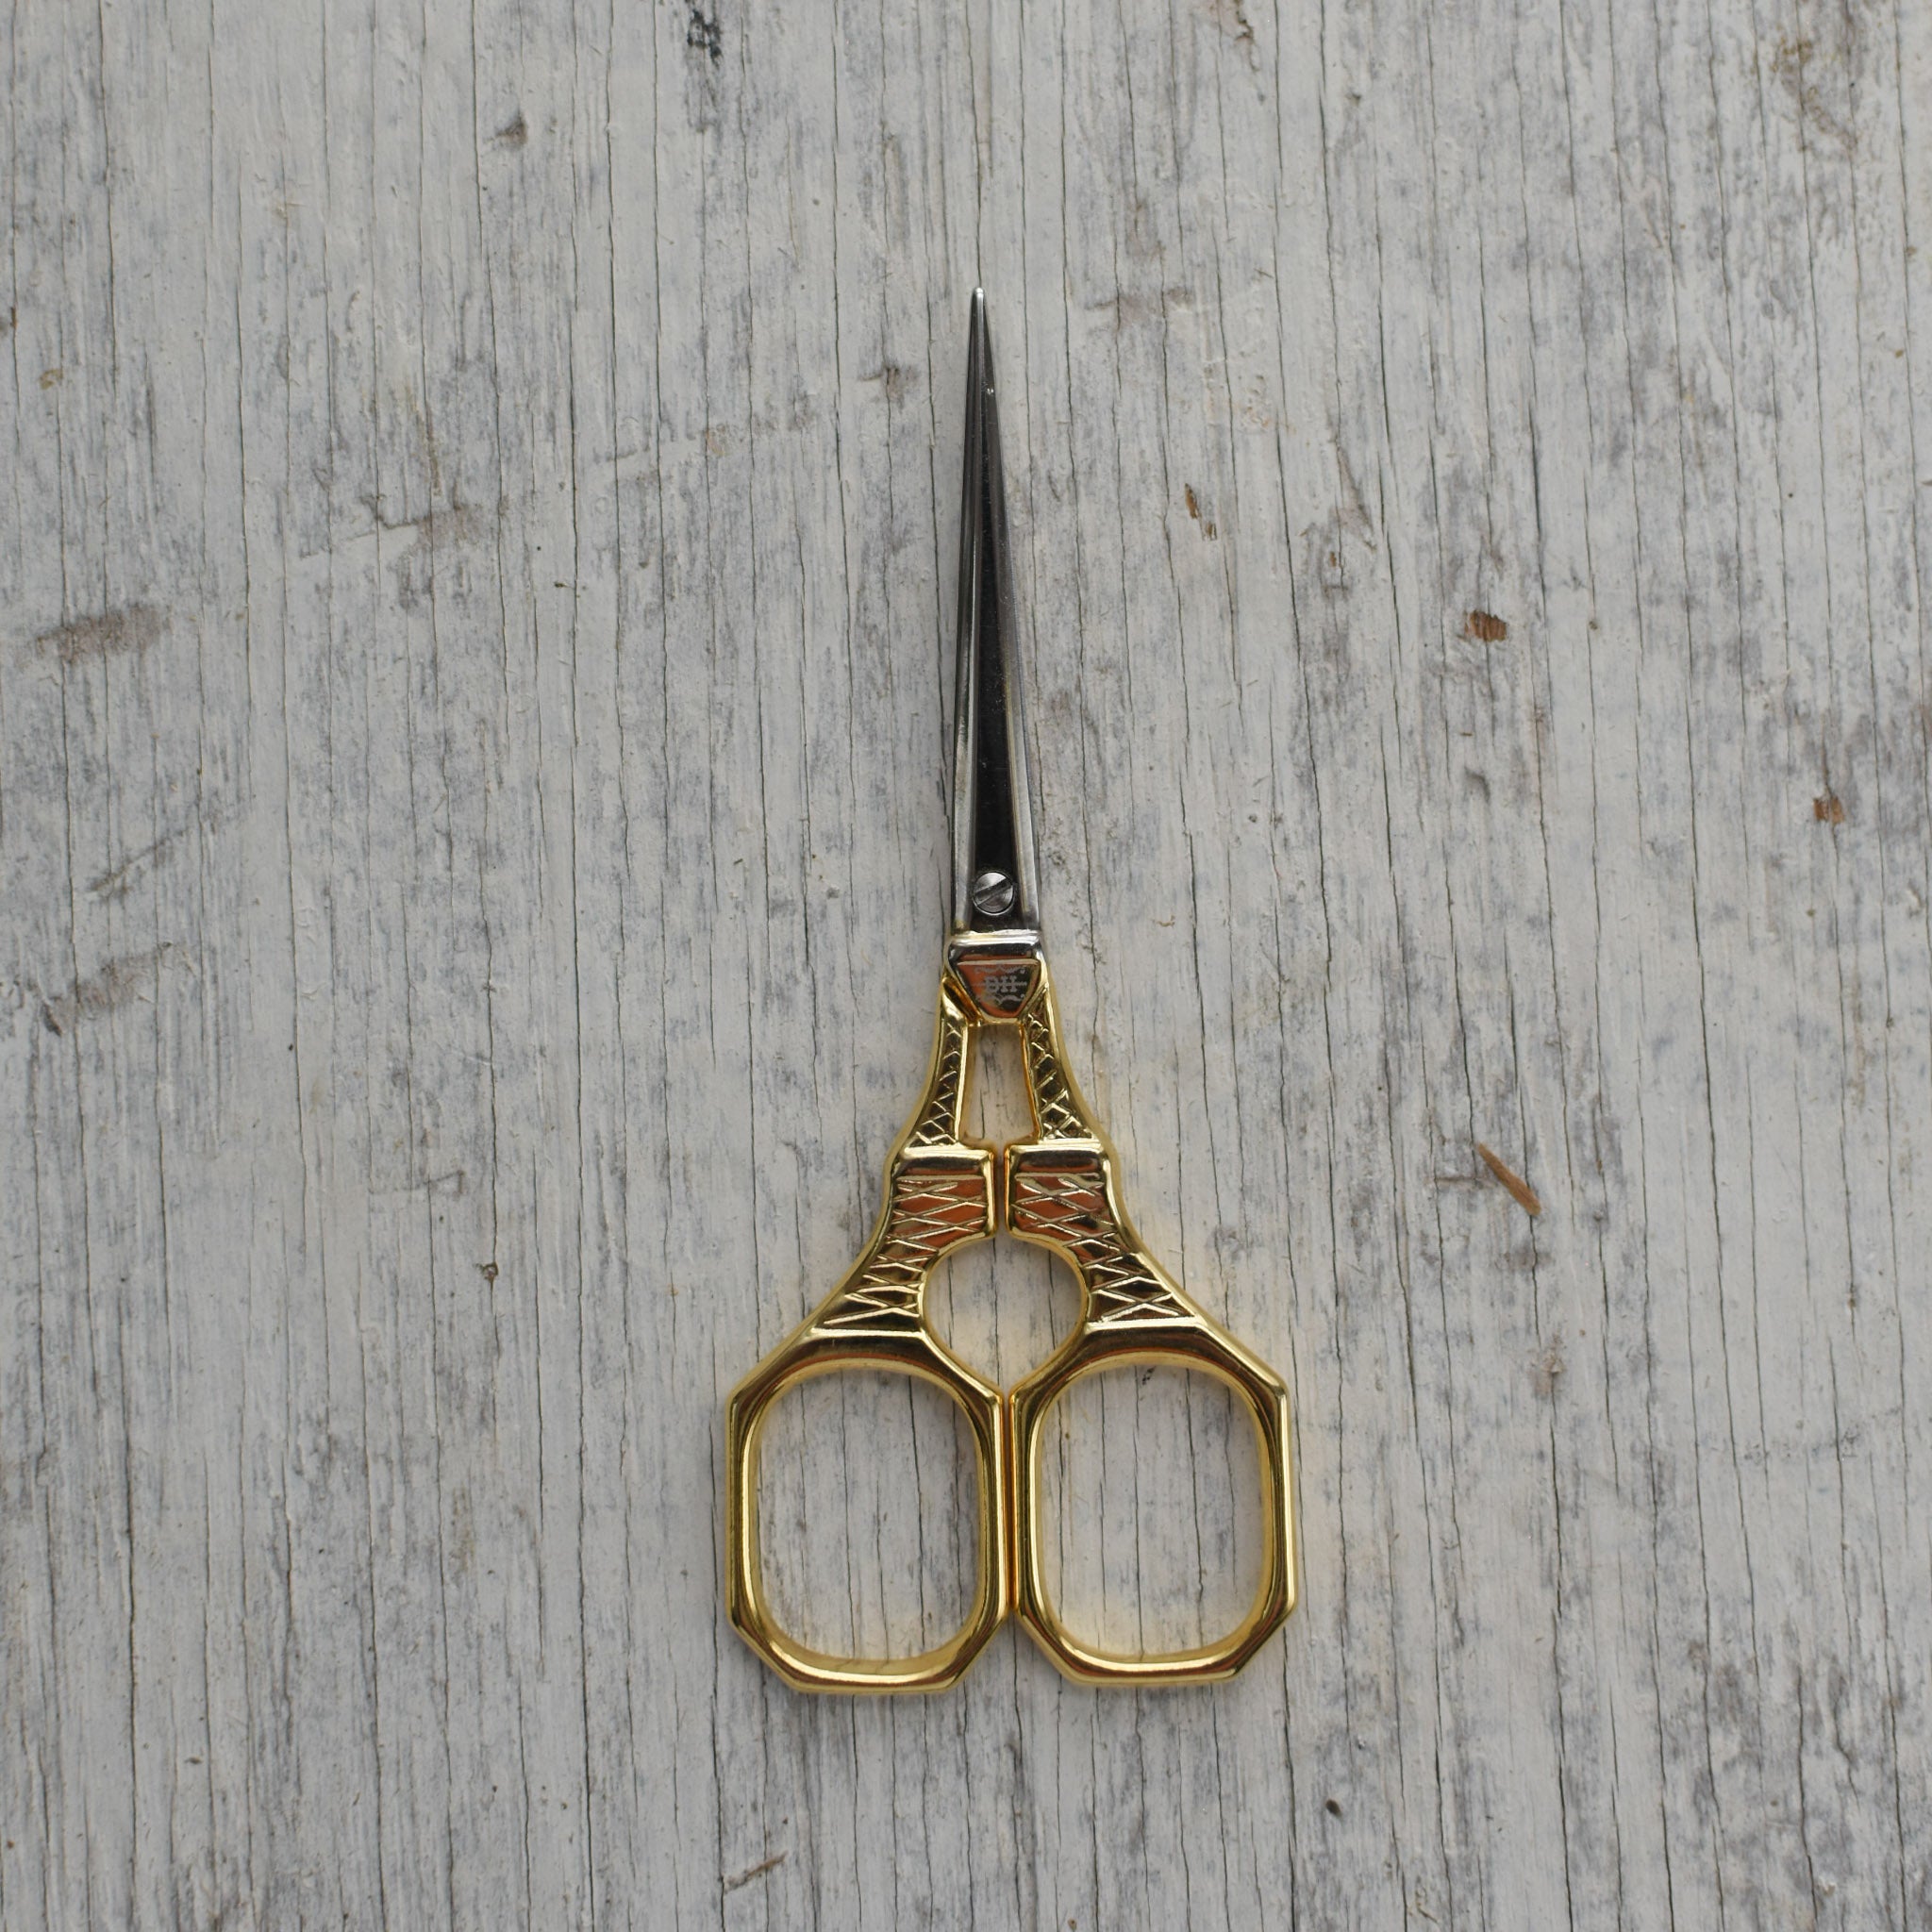 Embroidery Scissors - 24-Karat Gold Plated From Italy! - Palmer